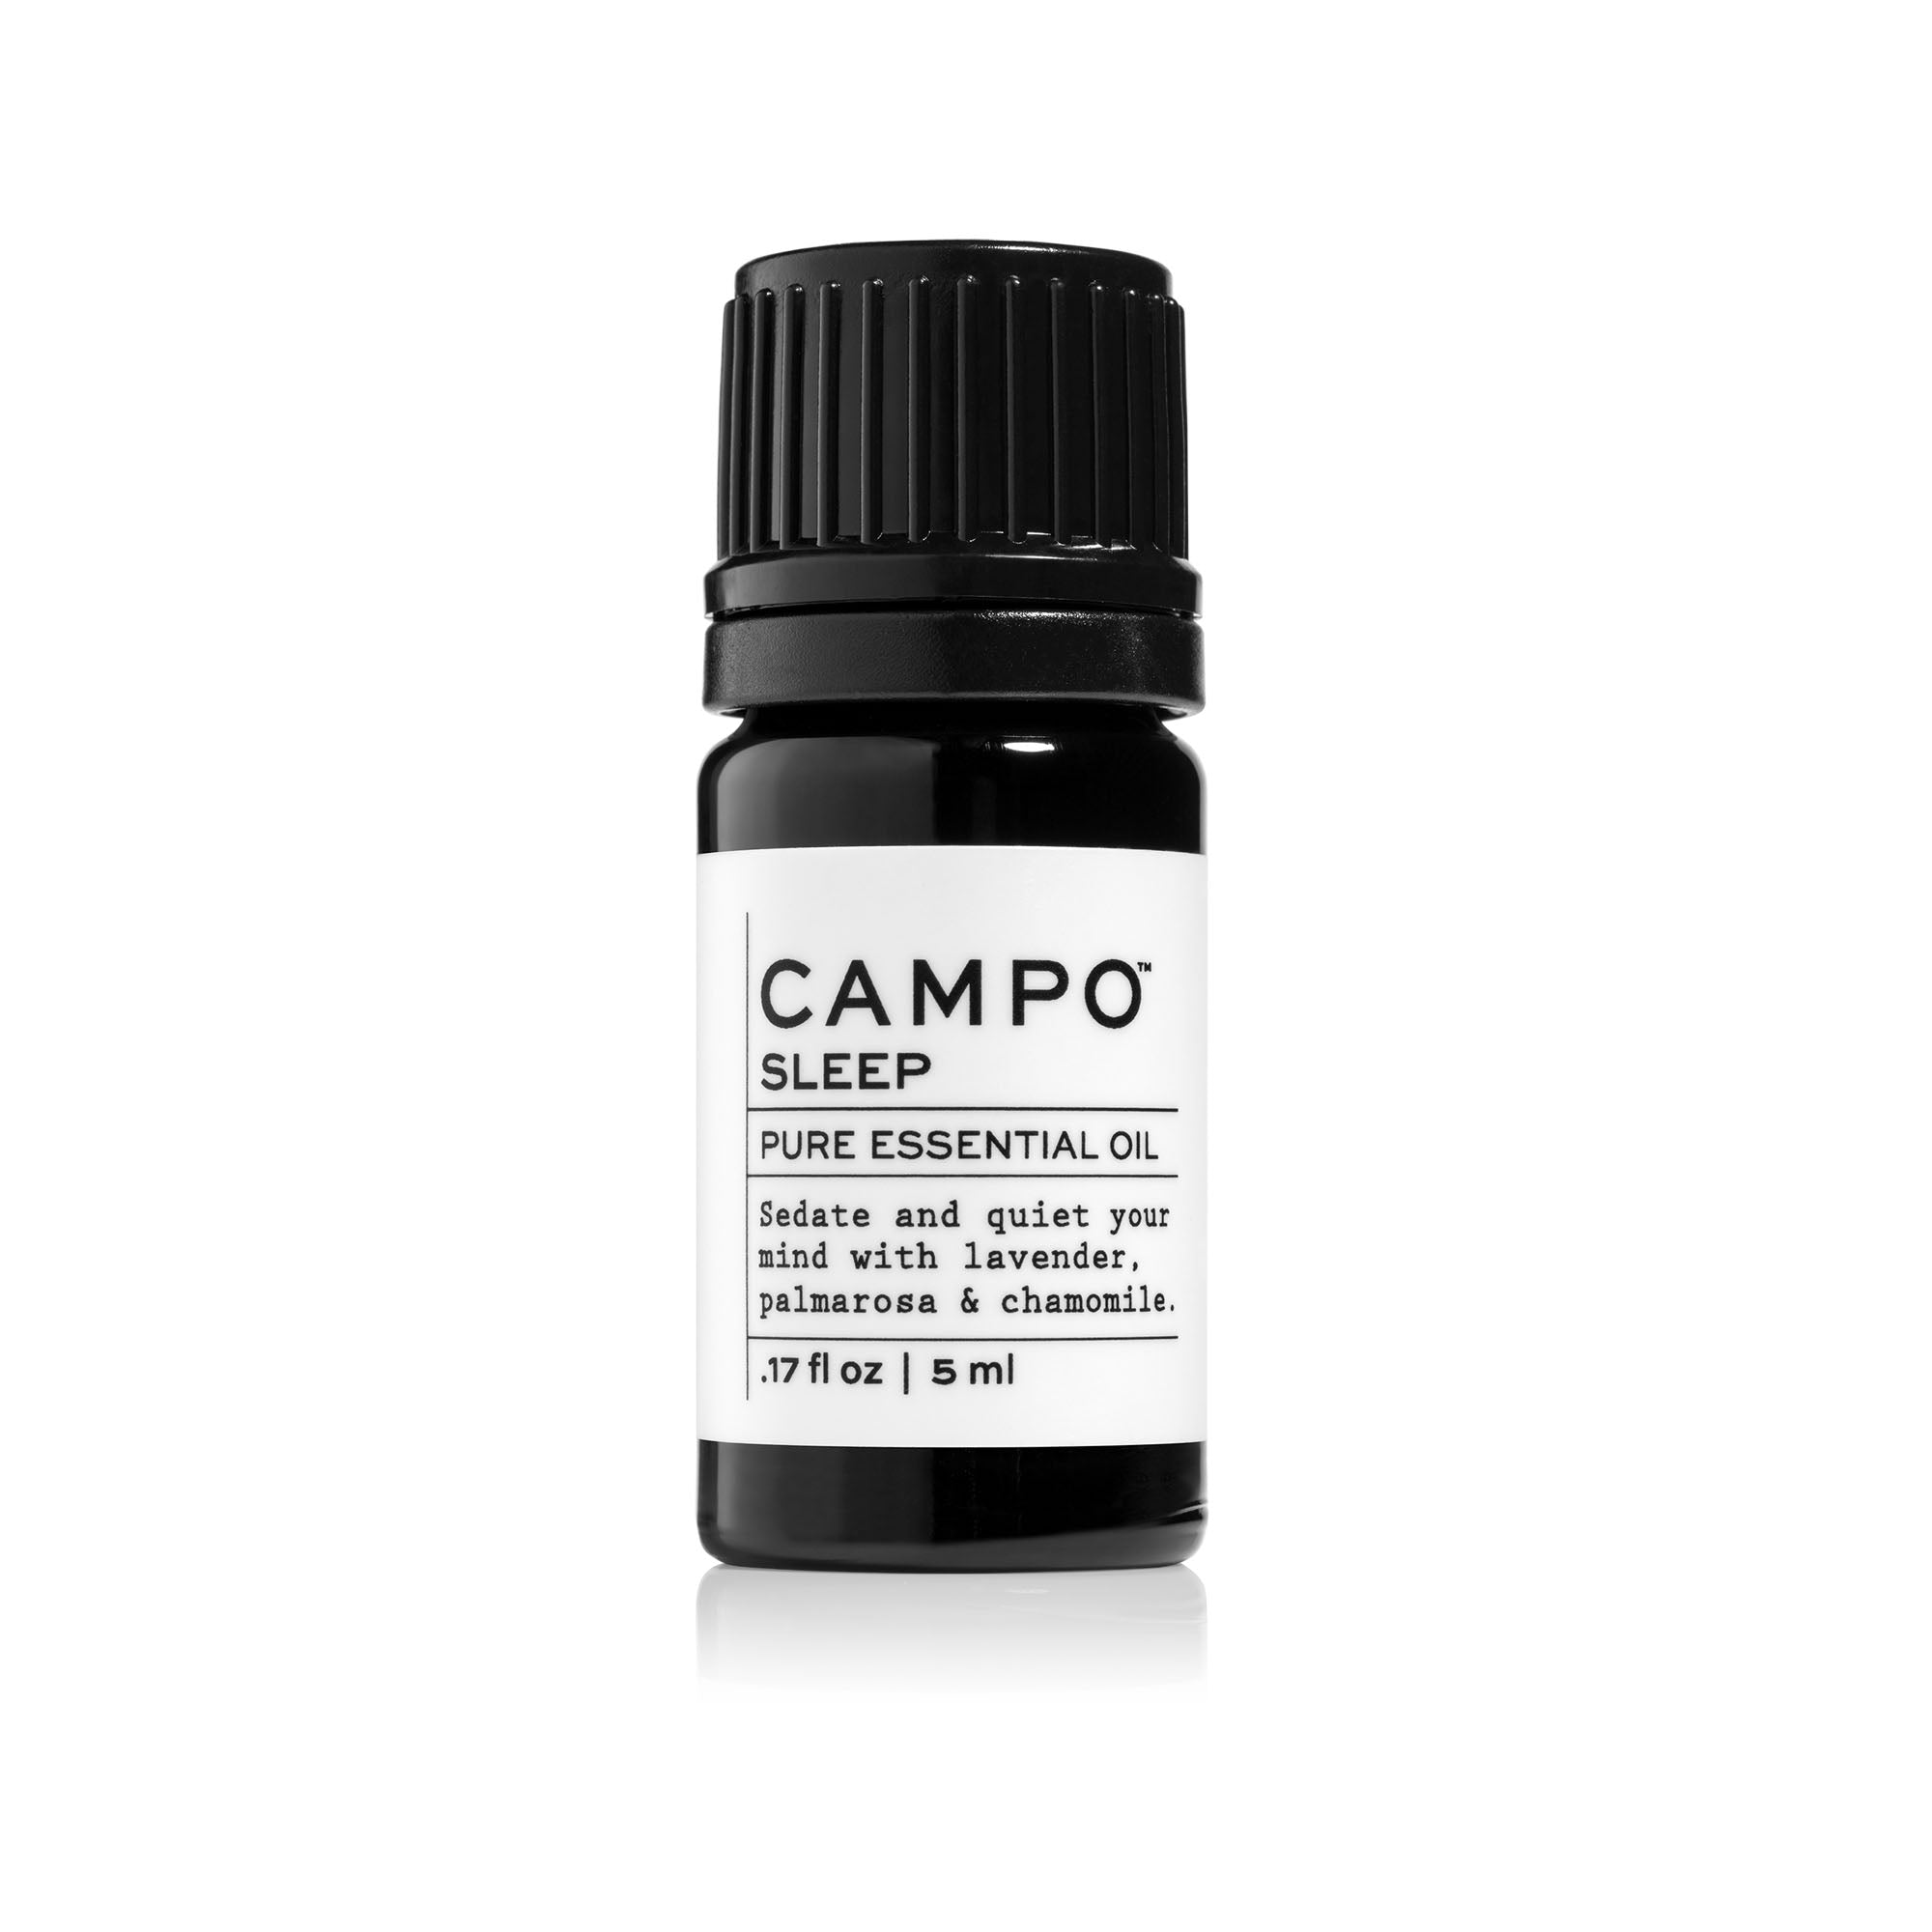 Campo Beauty SLEEP Blend 15 ml Essential Oil. Calm & quiet your mind naturally with this 100% pure essential oil blend of French Lavender, Wild Palmarosa, Roman Chamomile, and Valerian Root.